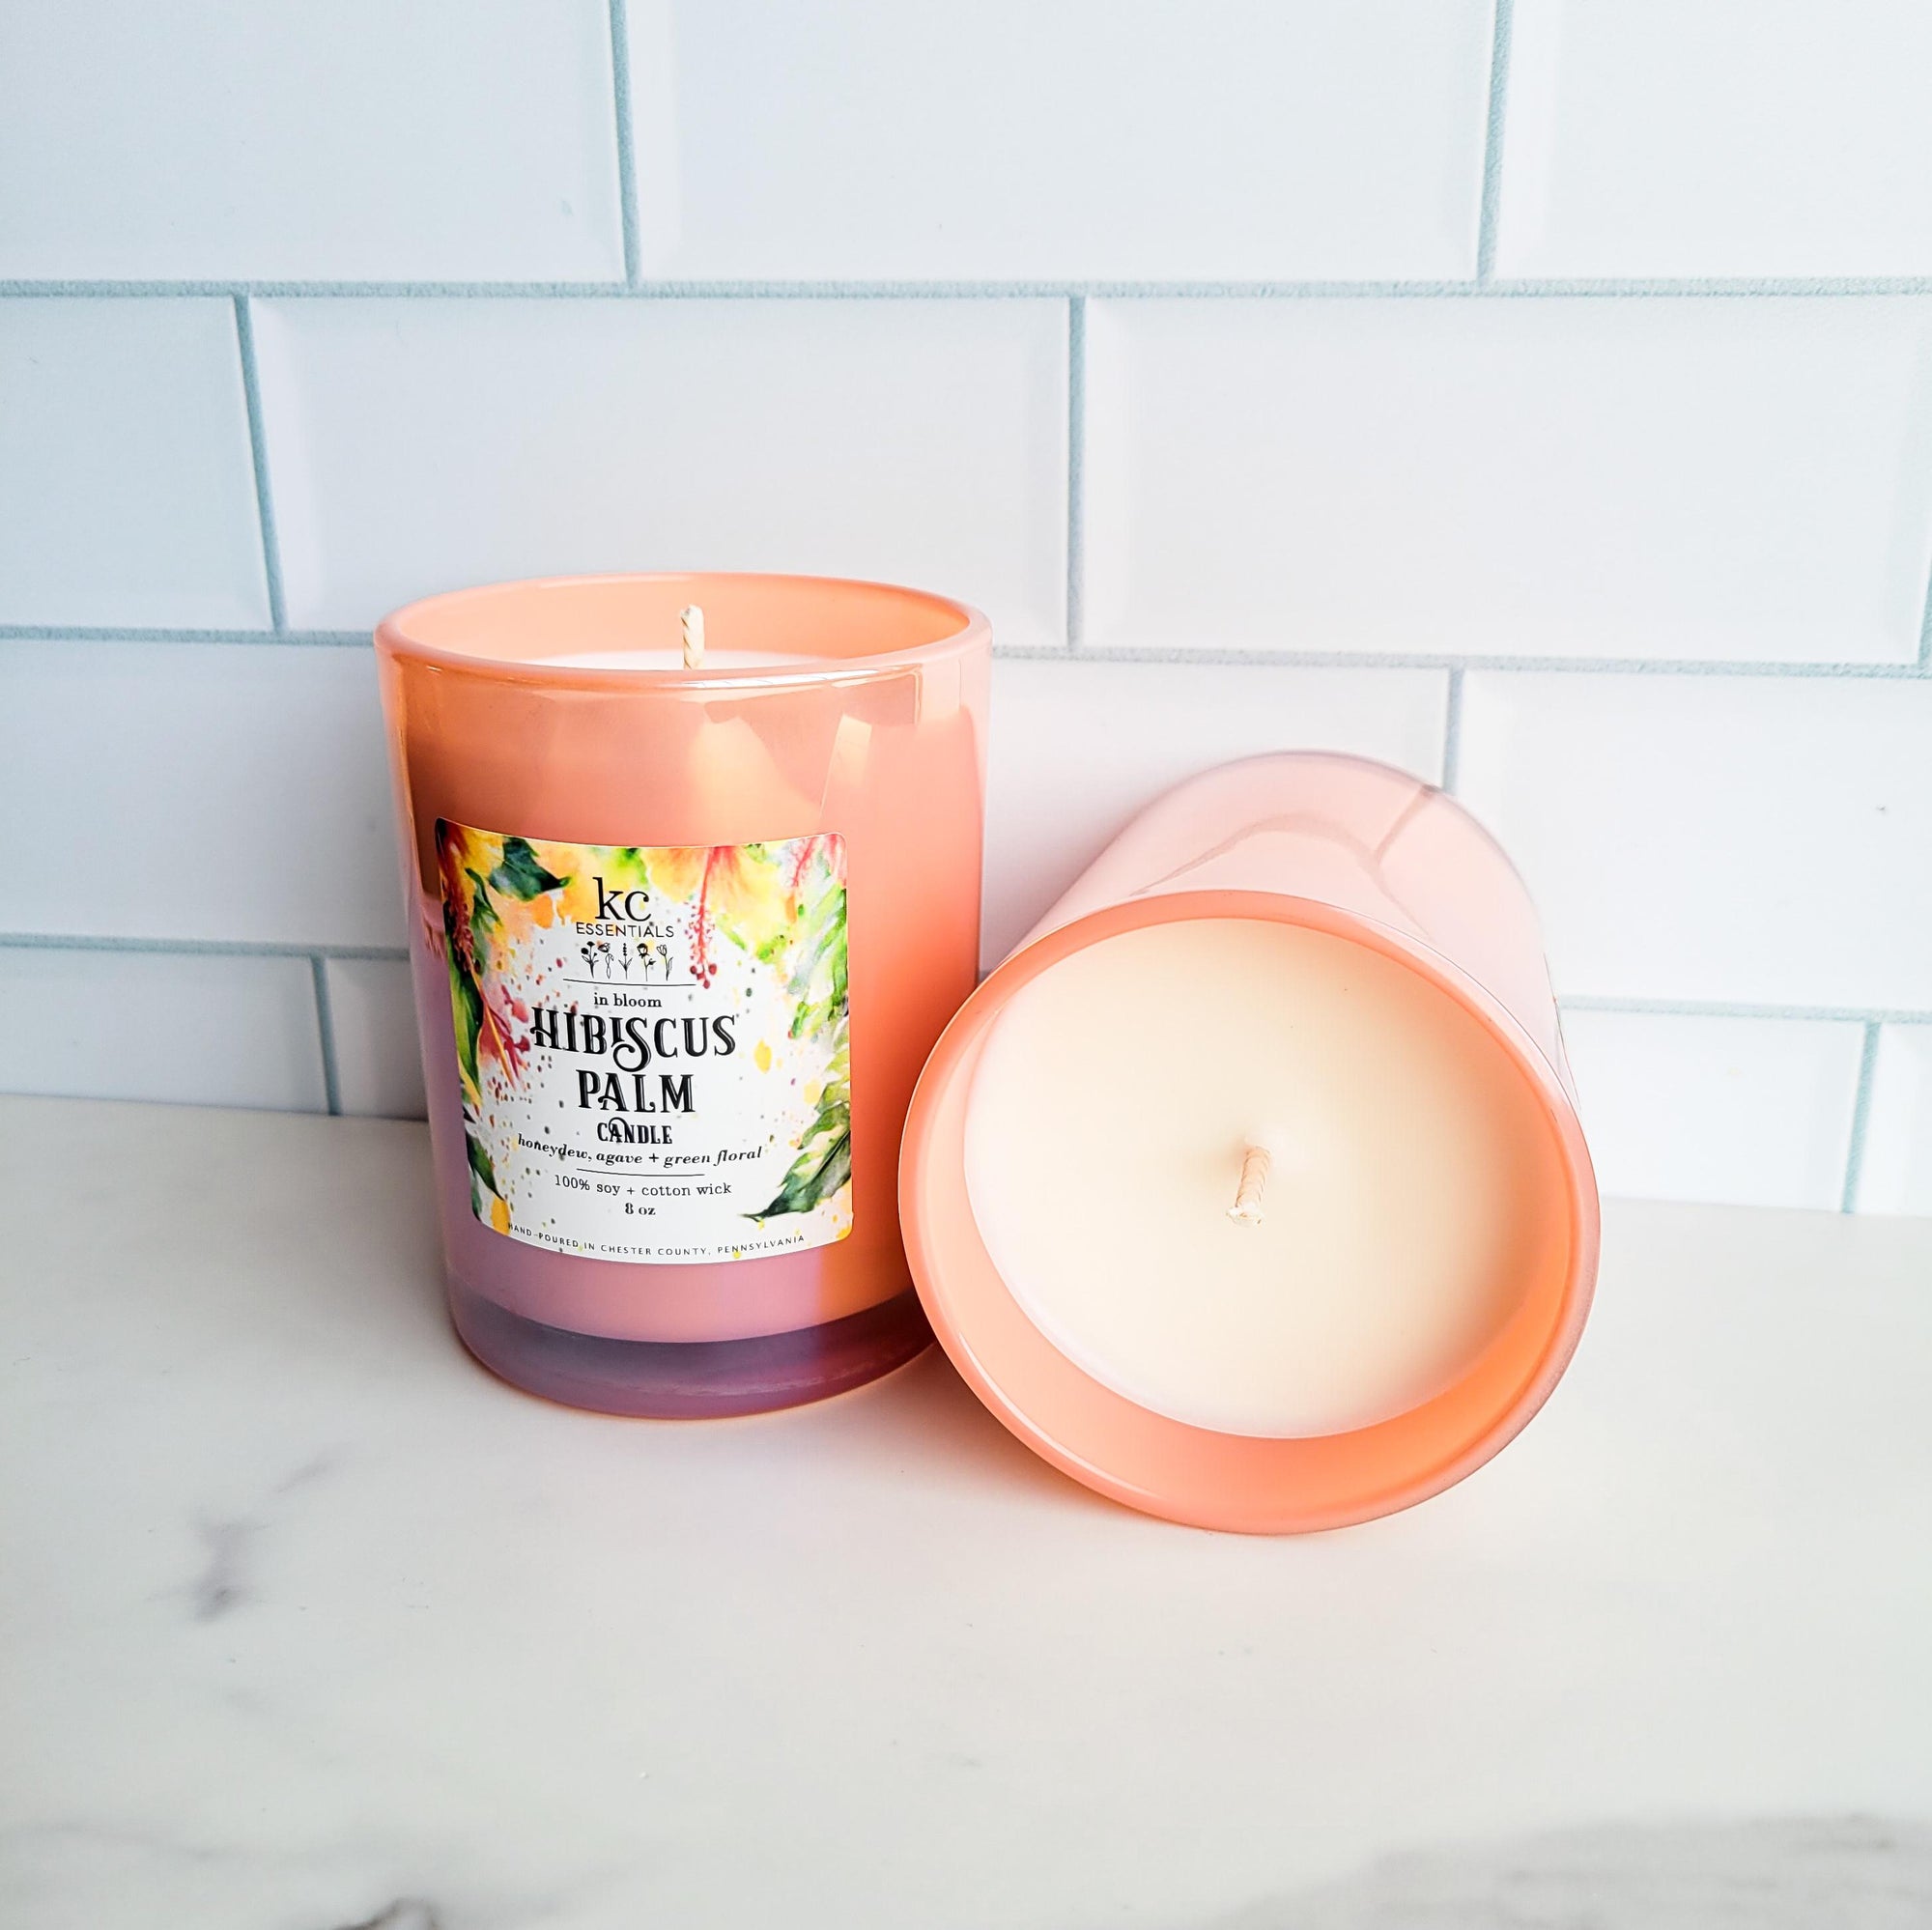 8 oz. Candle - Hibiscus Palm